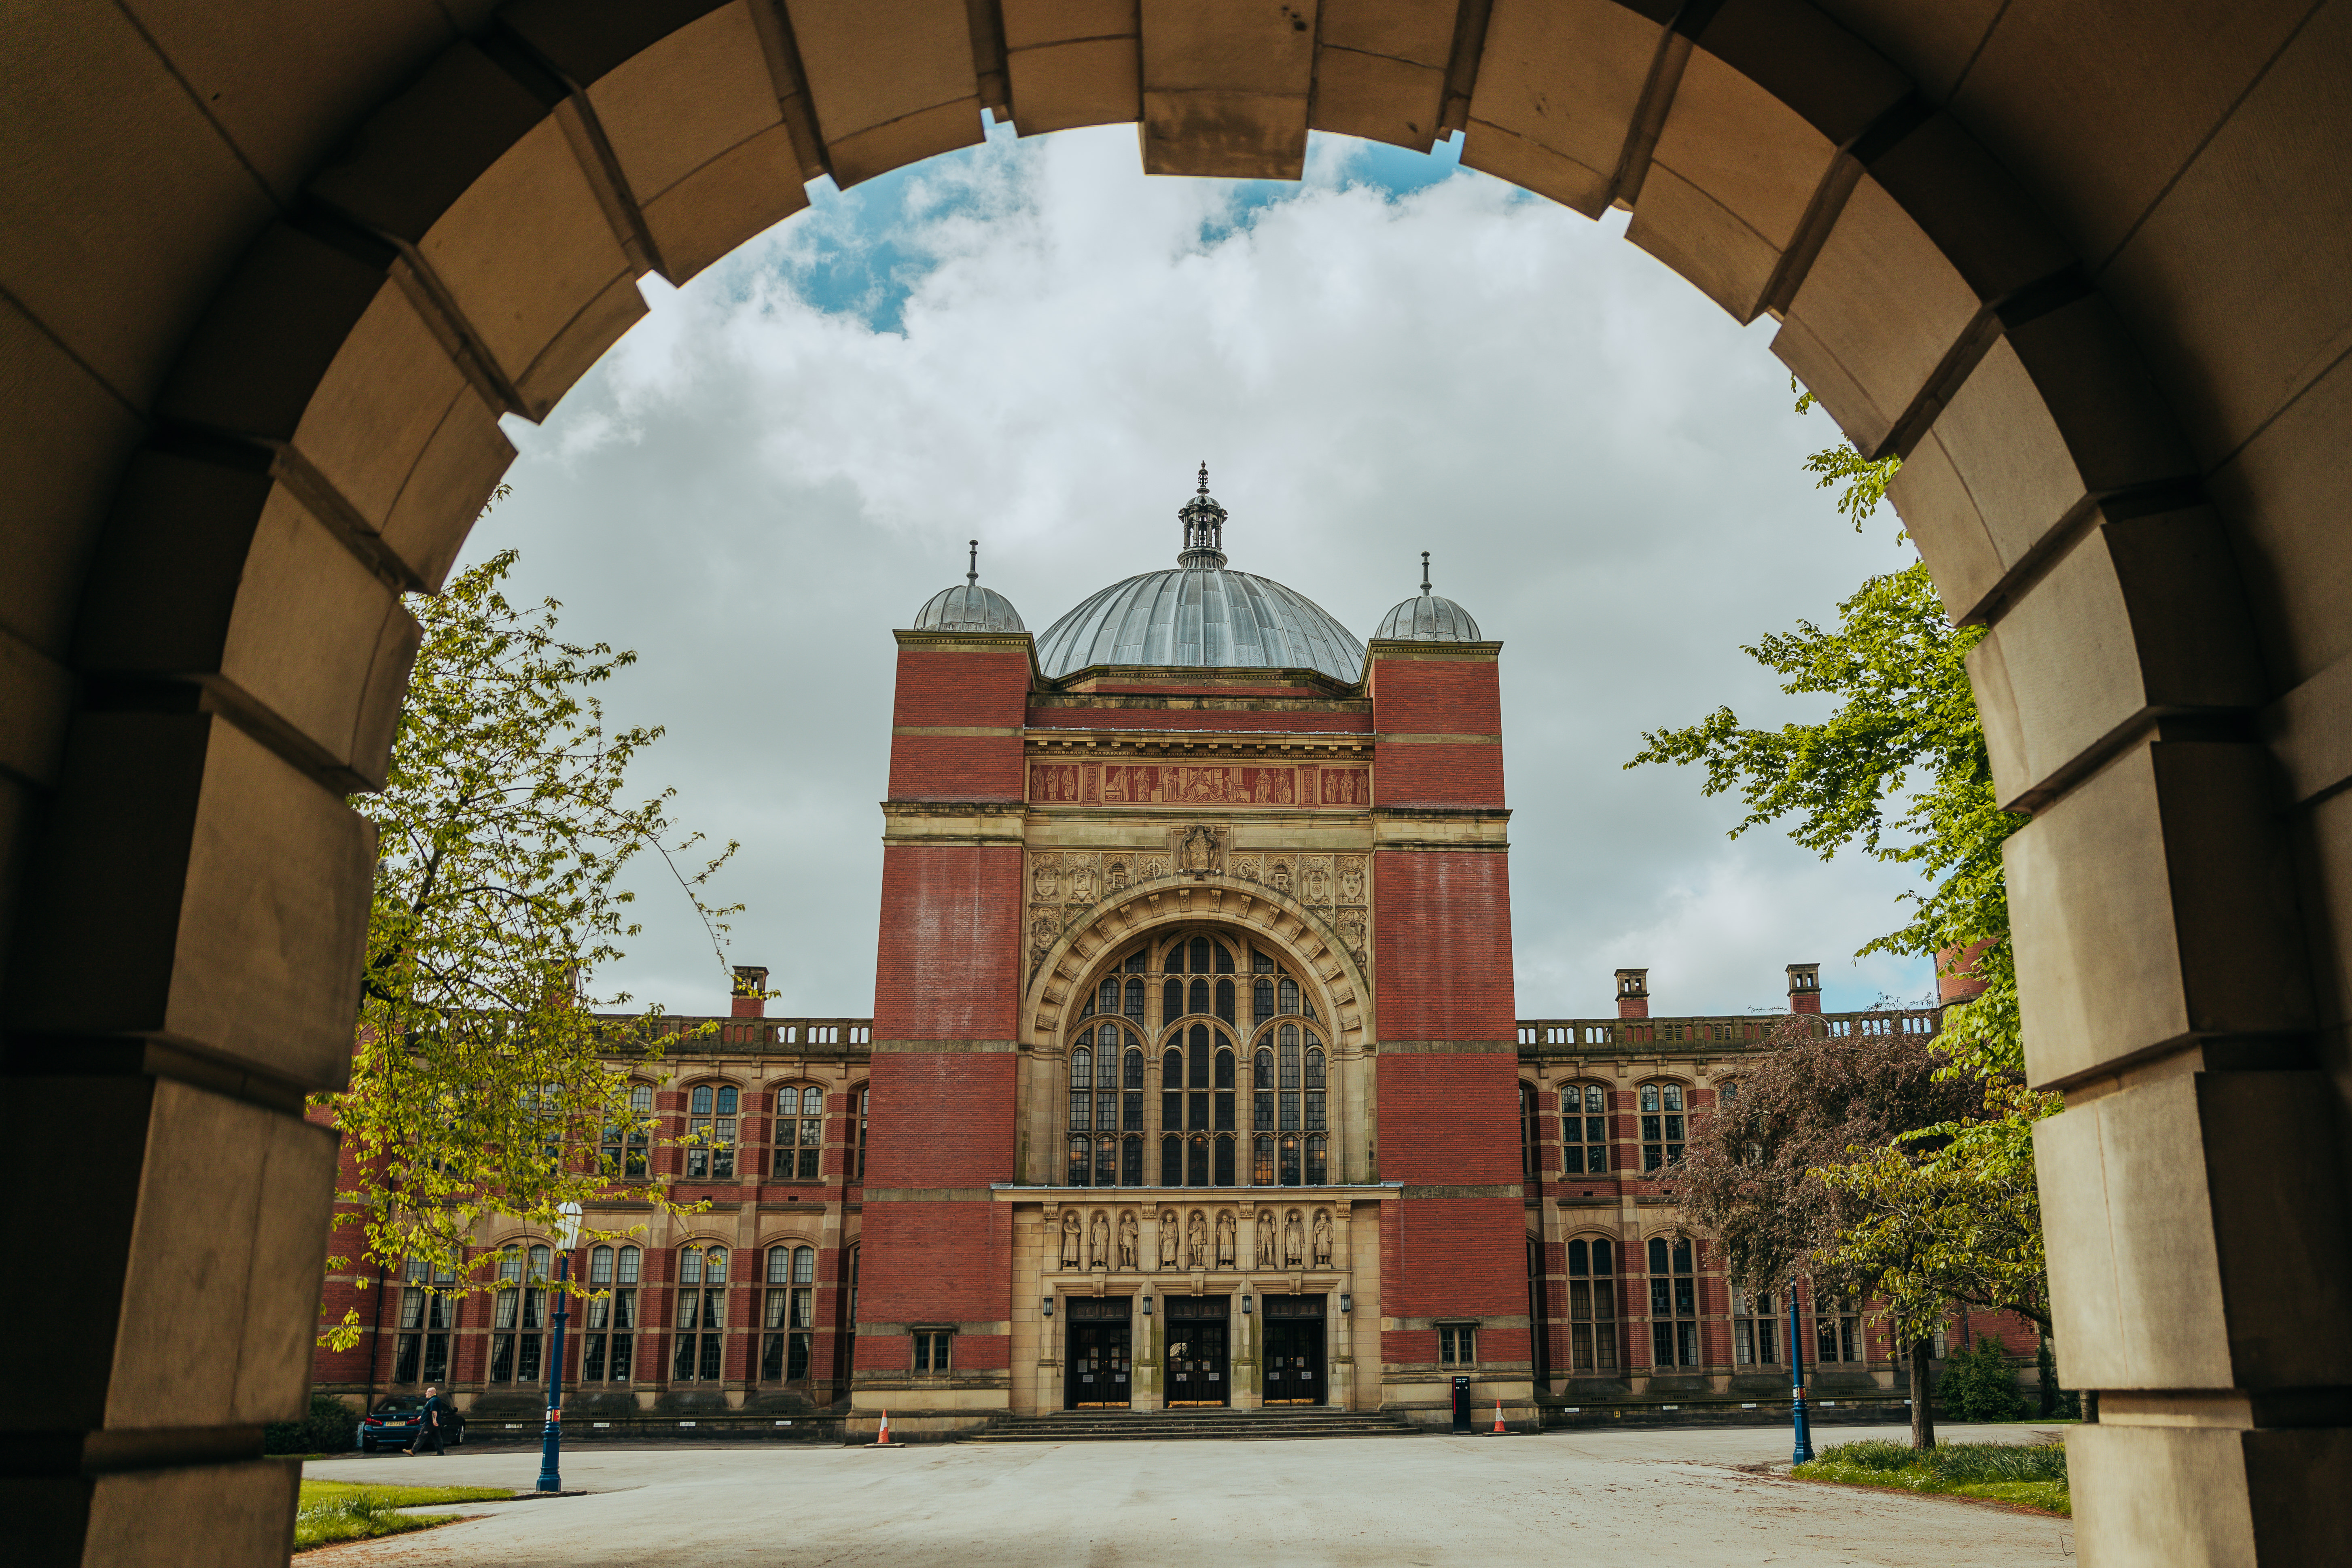 The law arches by the University Aston Webb building